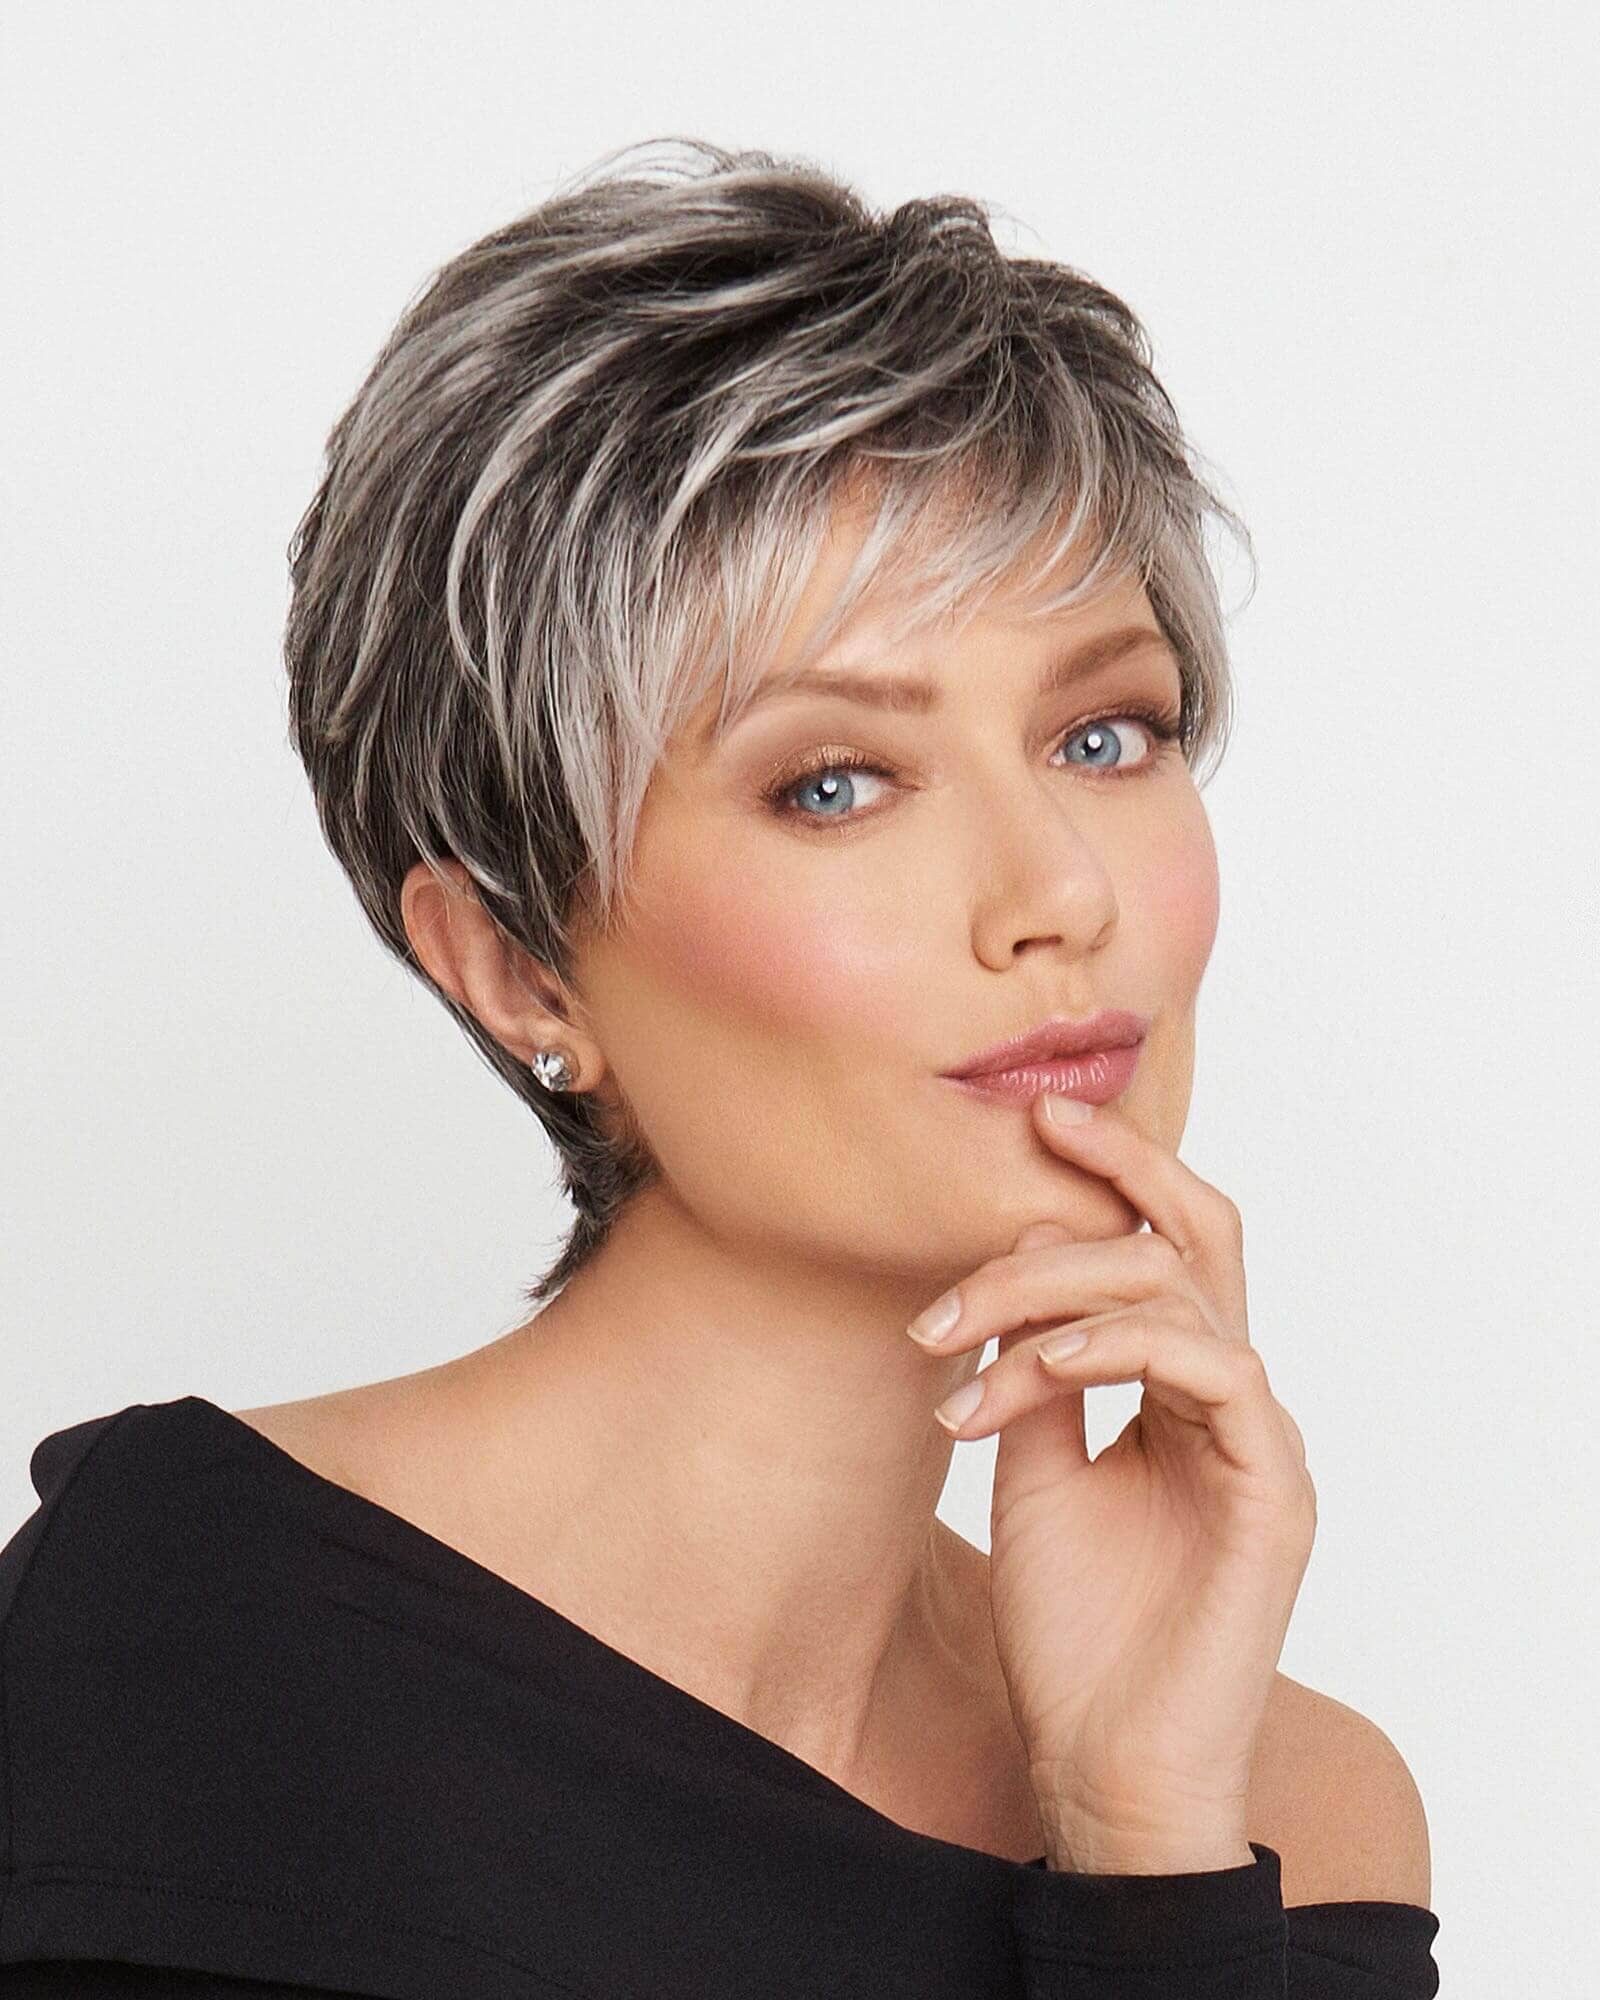 50 pixie haircuts you'll see trending in 2019